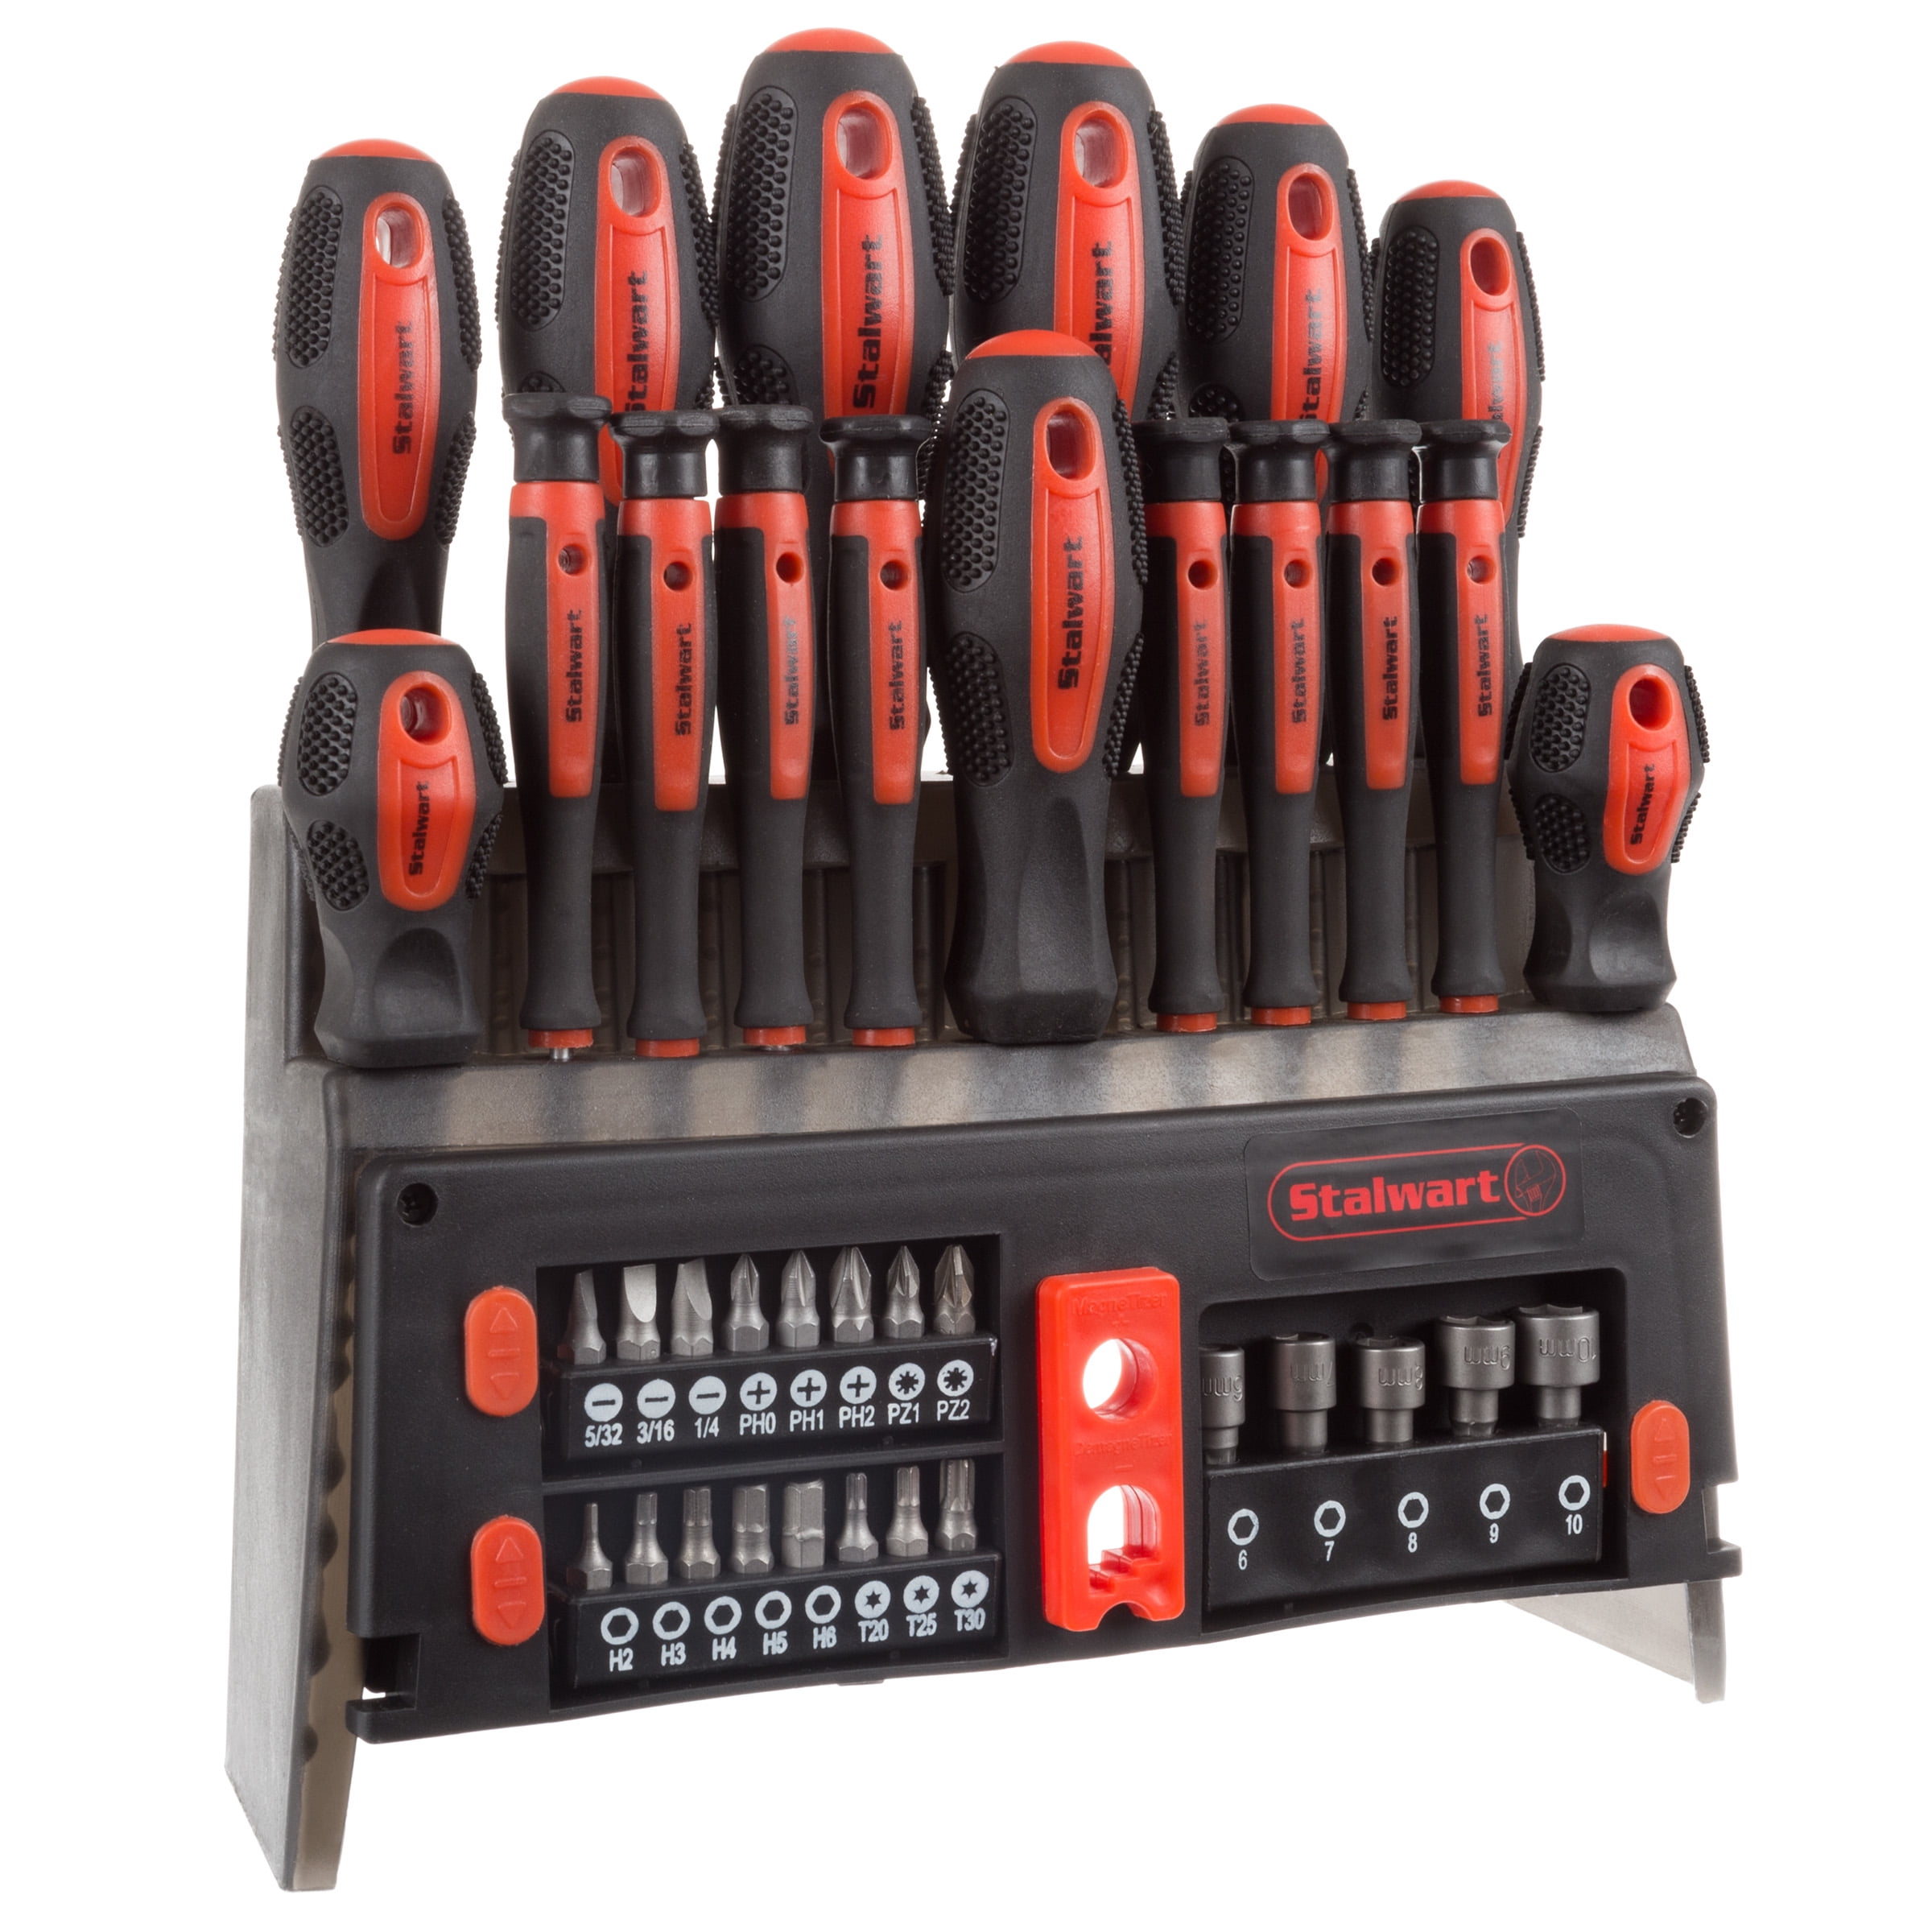 Slotted Pz and Star Screwdrivers By Stalwart 26 Piece Screwdriver Set with Wall Mount Stand and Magnetic Tips- Precision Kit Including Phillips 